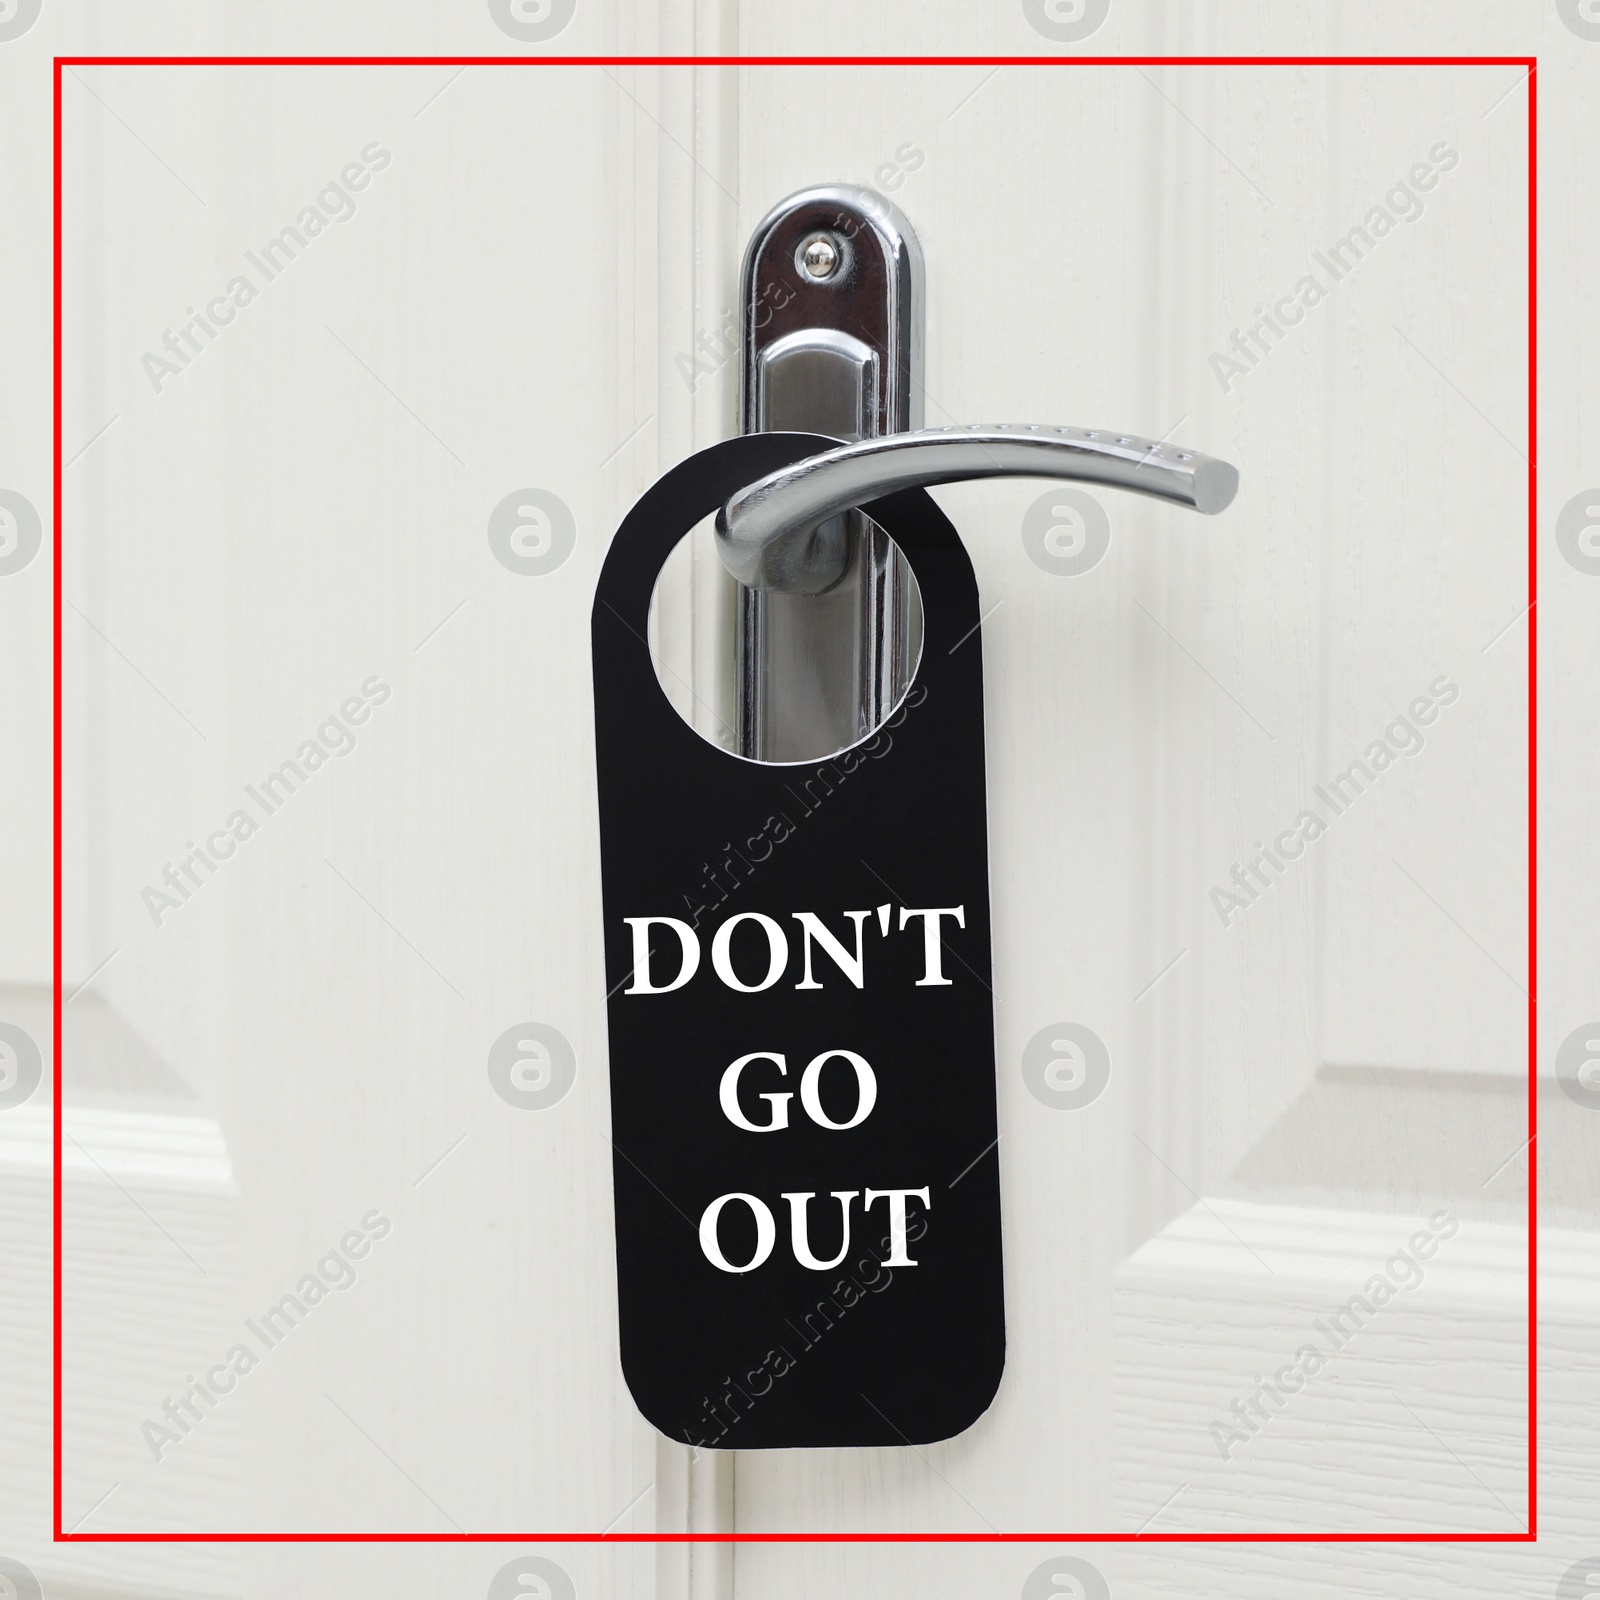 Image of Closed door with sign DON'T GO OUT on handle. Stay at home during coronavirus quarantine